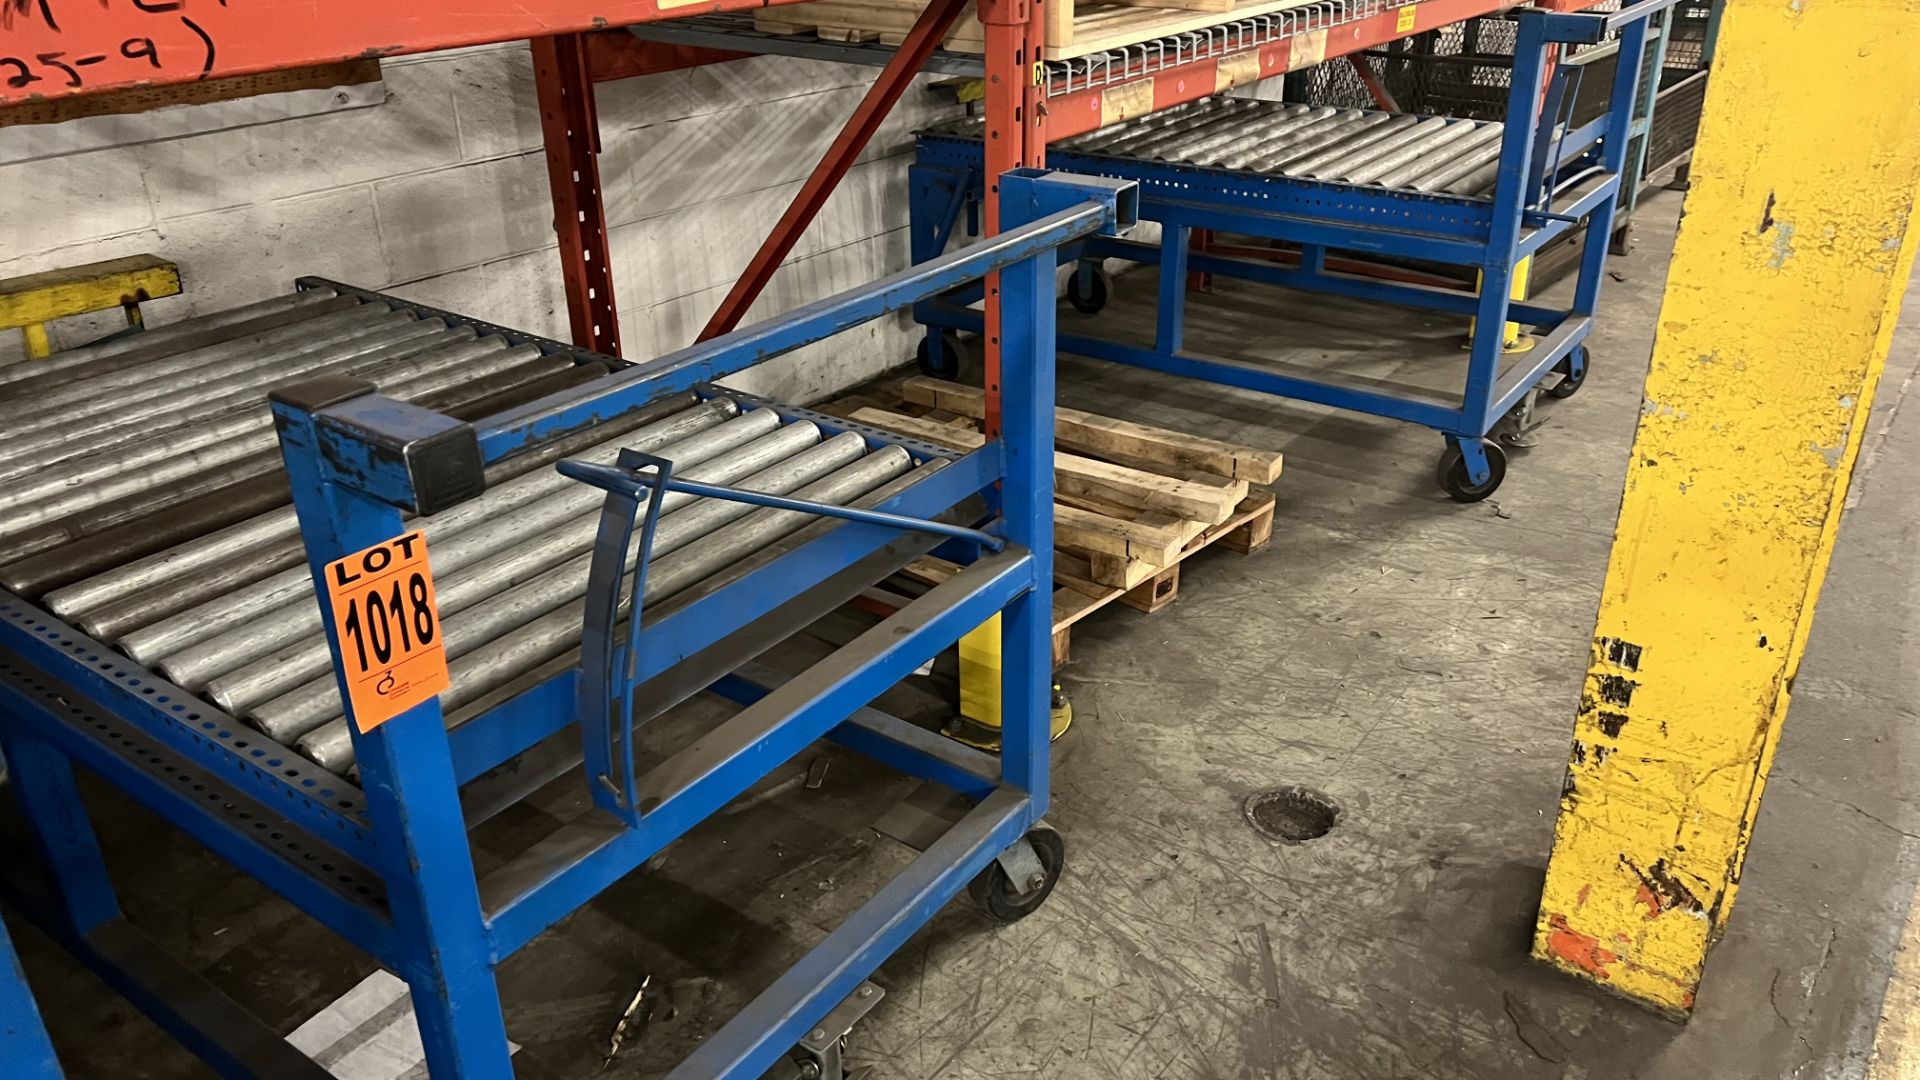 Lot of (2) steel frame manual roller conveyors w/ handles, casters, foot lock and adjustable height